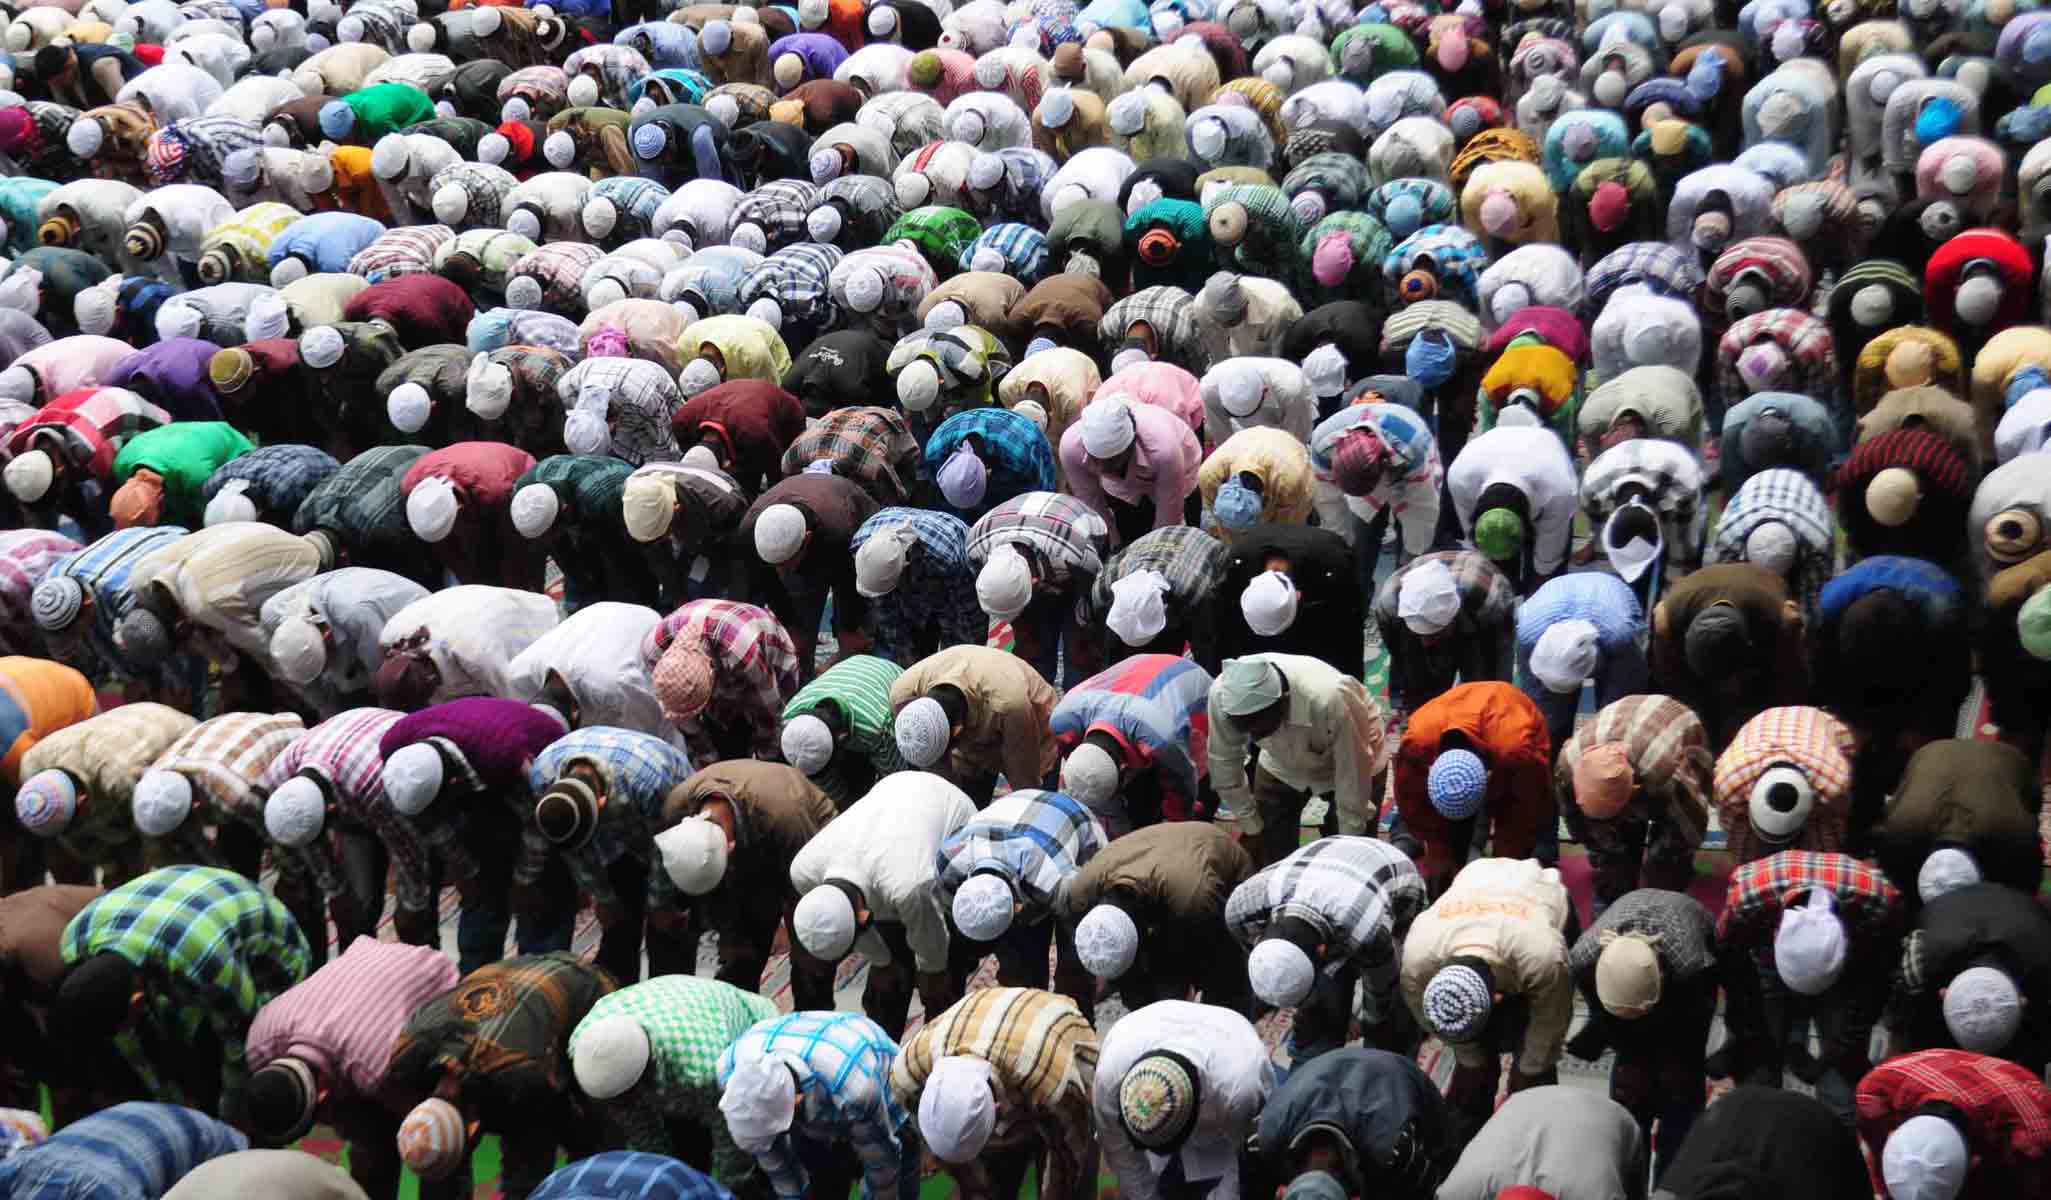 Muslims offer prayers during Eid-al-Fitr in the northern hill town of Shimla August 20, 2012